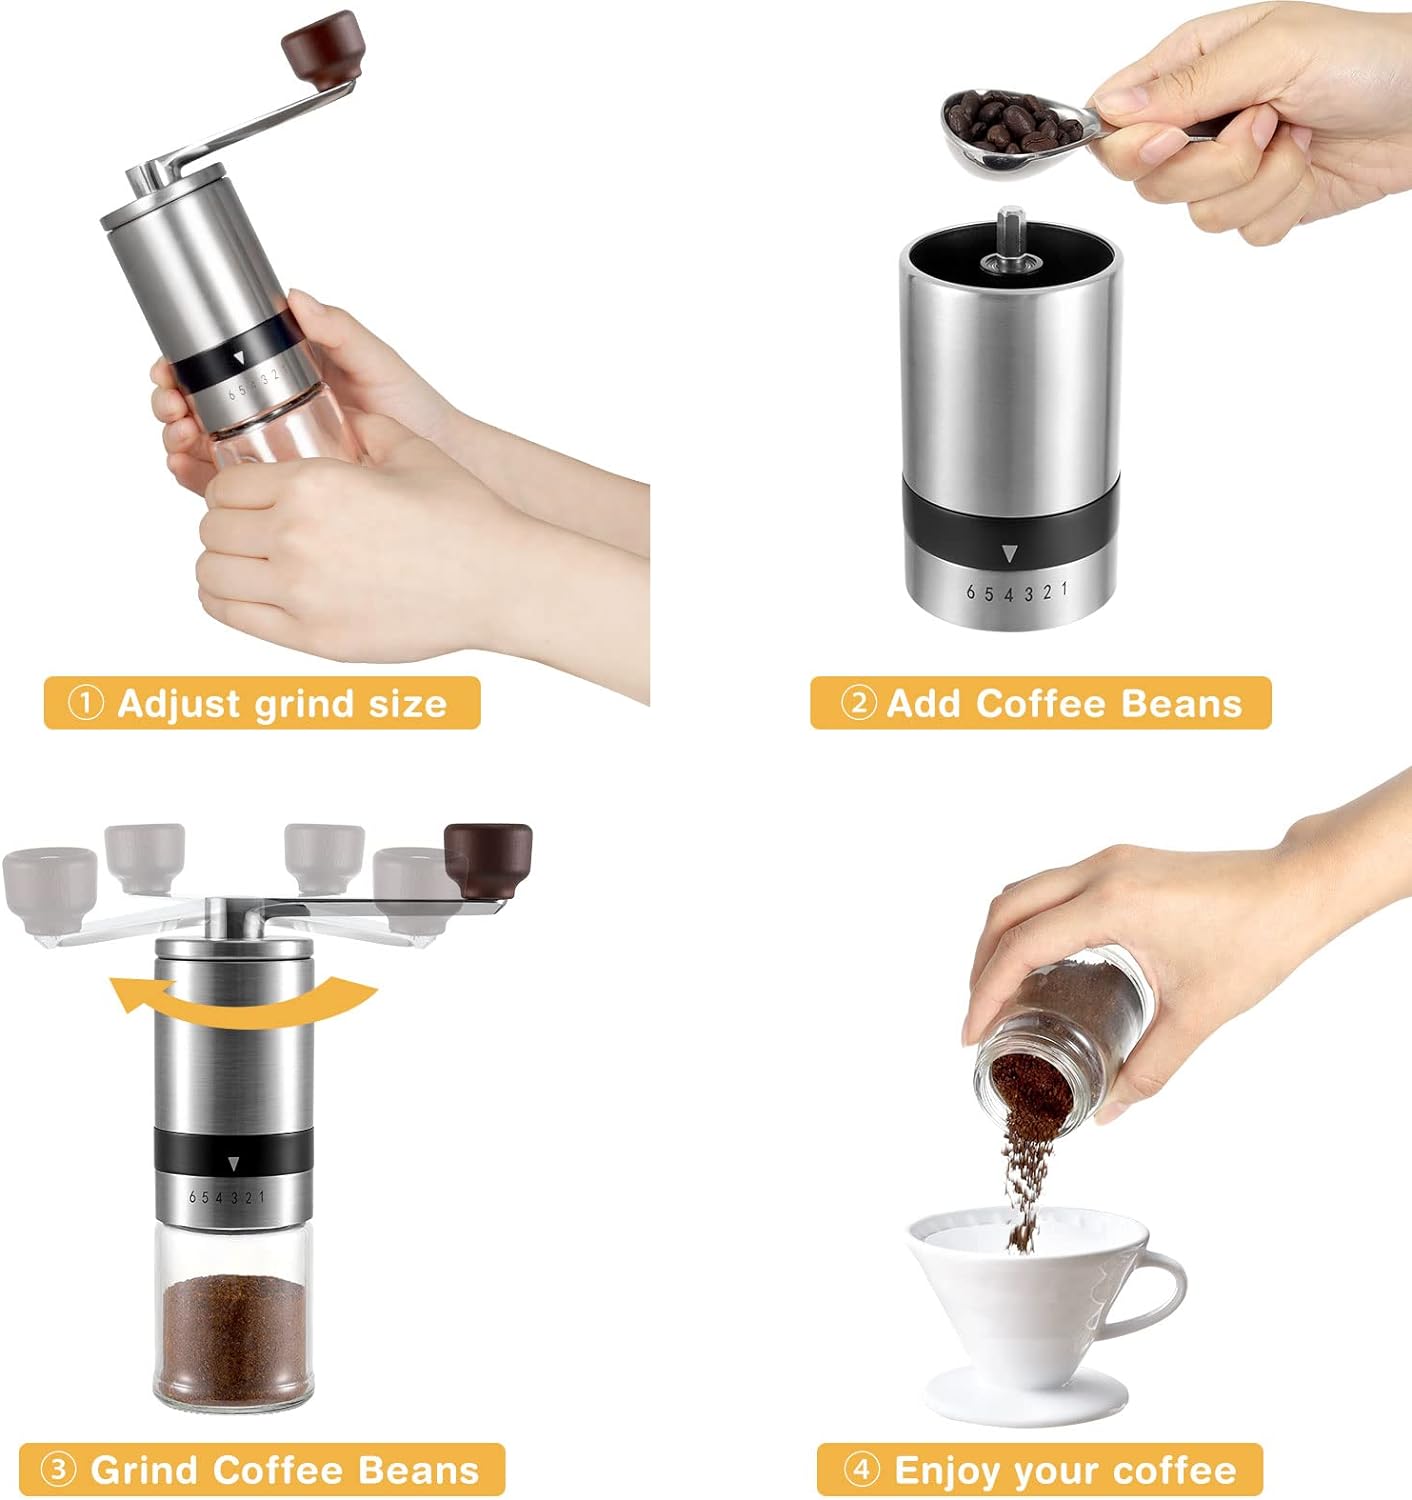 Classy Manual Coffee Grinder - Vintage Hand Coffee Mill with Ceramic Burrs 6 External Adjustable Settings - Portable Hand Crank - Cream Color